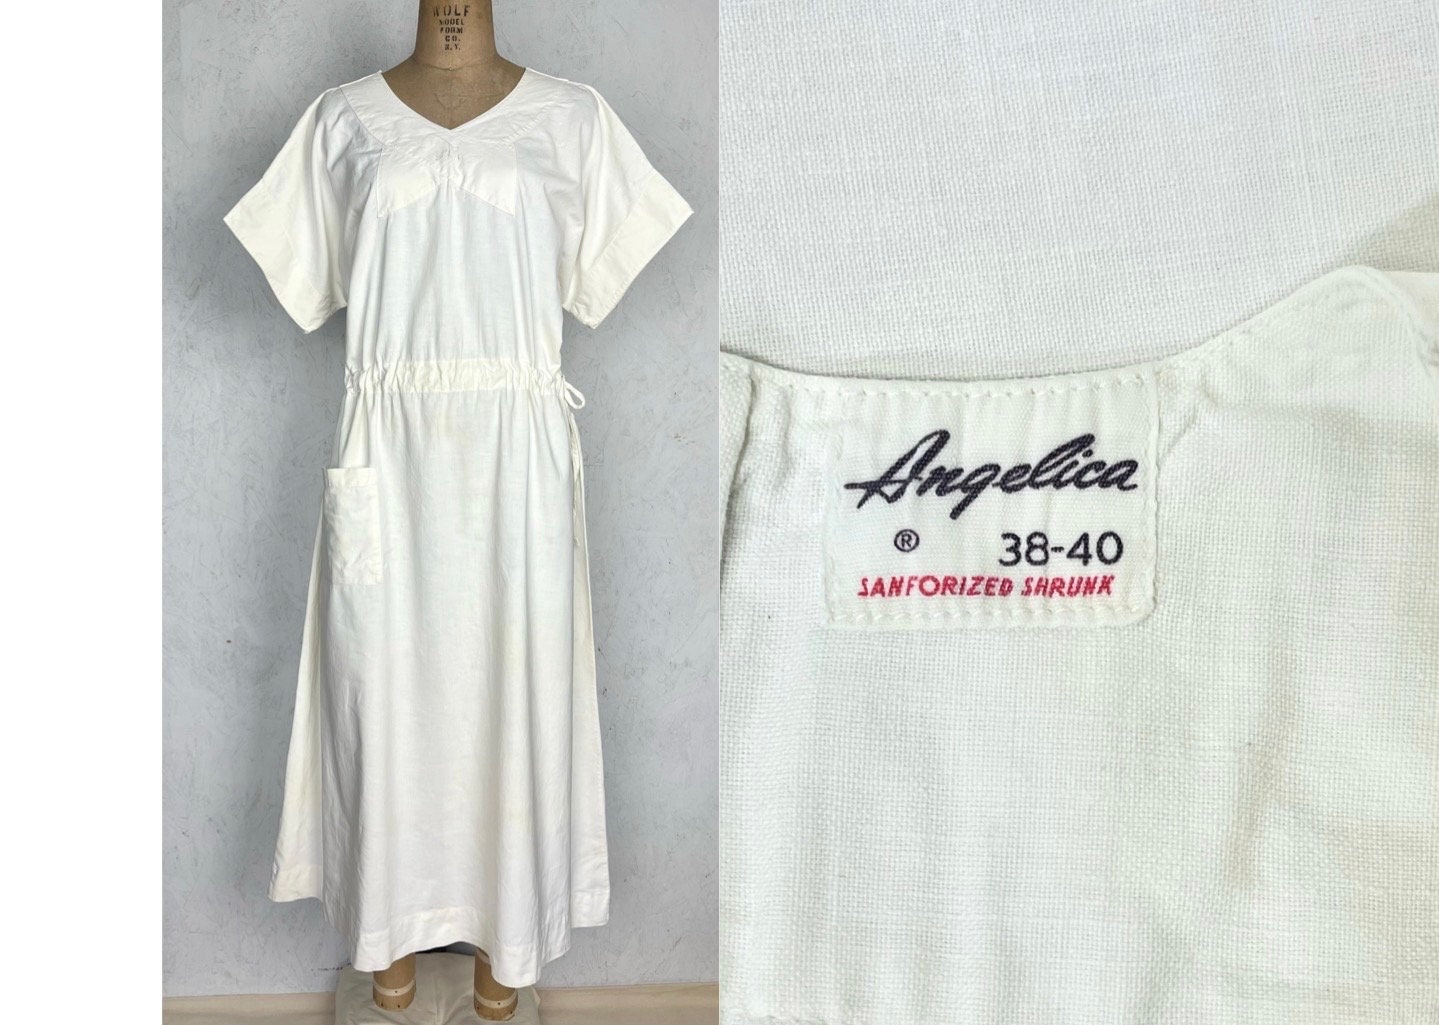 vintage 1940s French Surgical gown